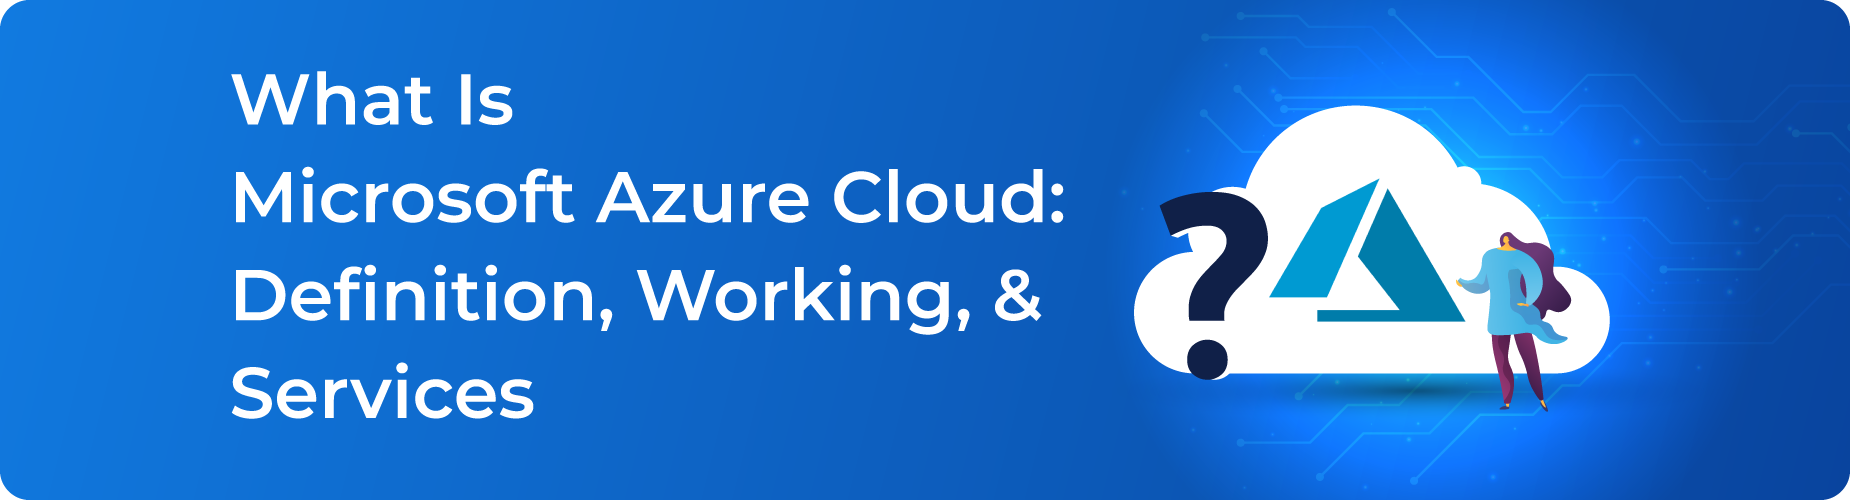 what is microsoft azure guide